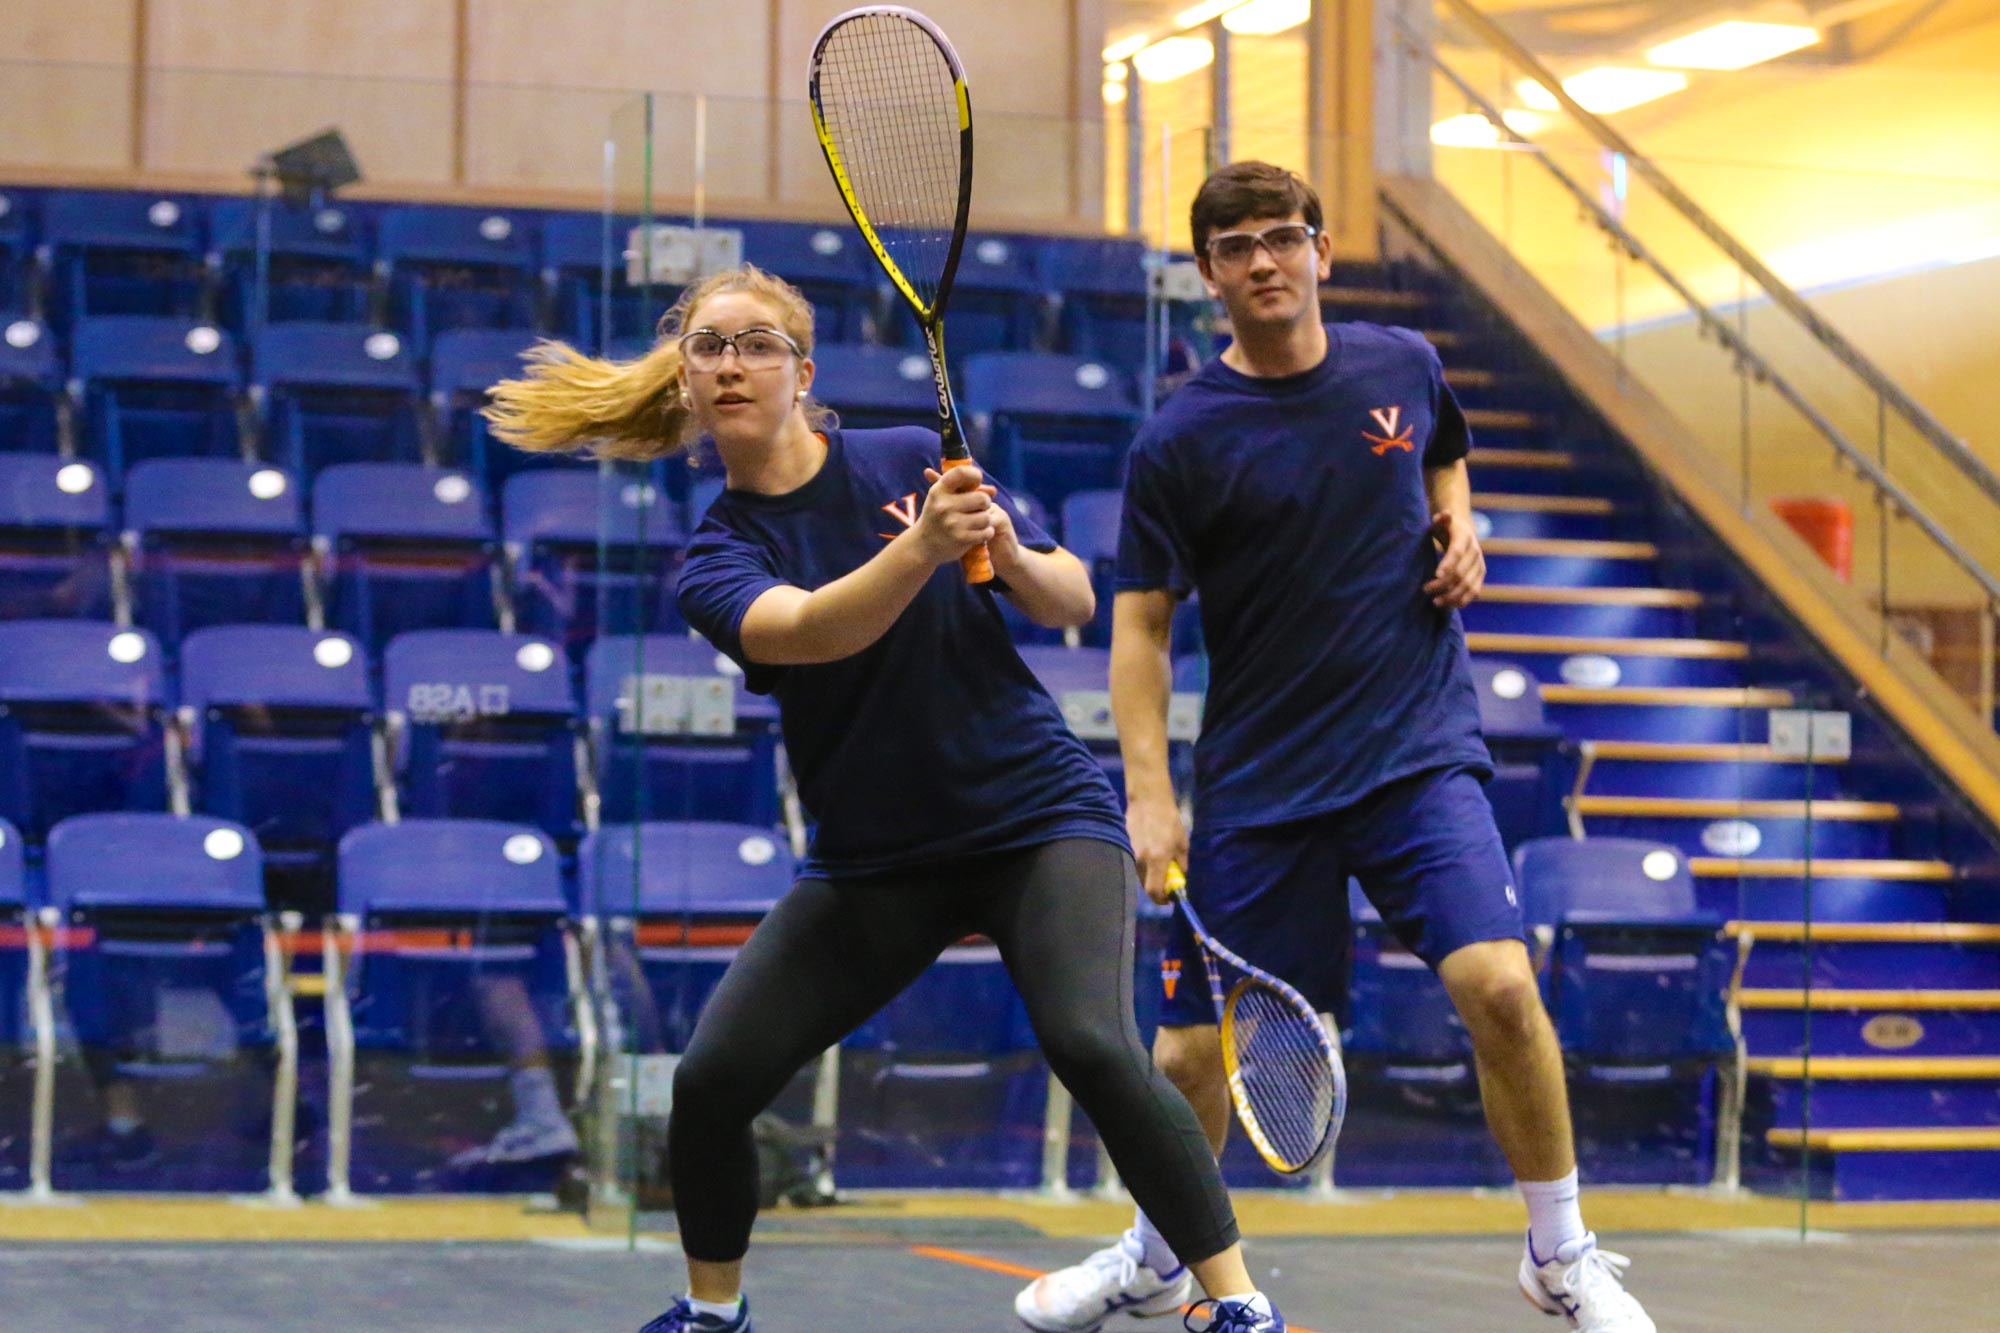 squash players Julia Thompson and Harrison Kapp playing in a court